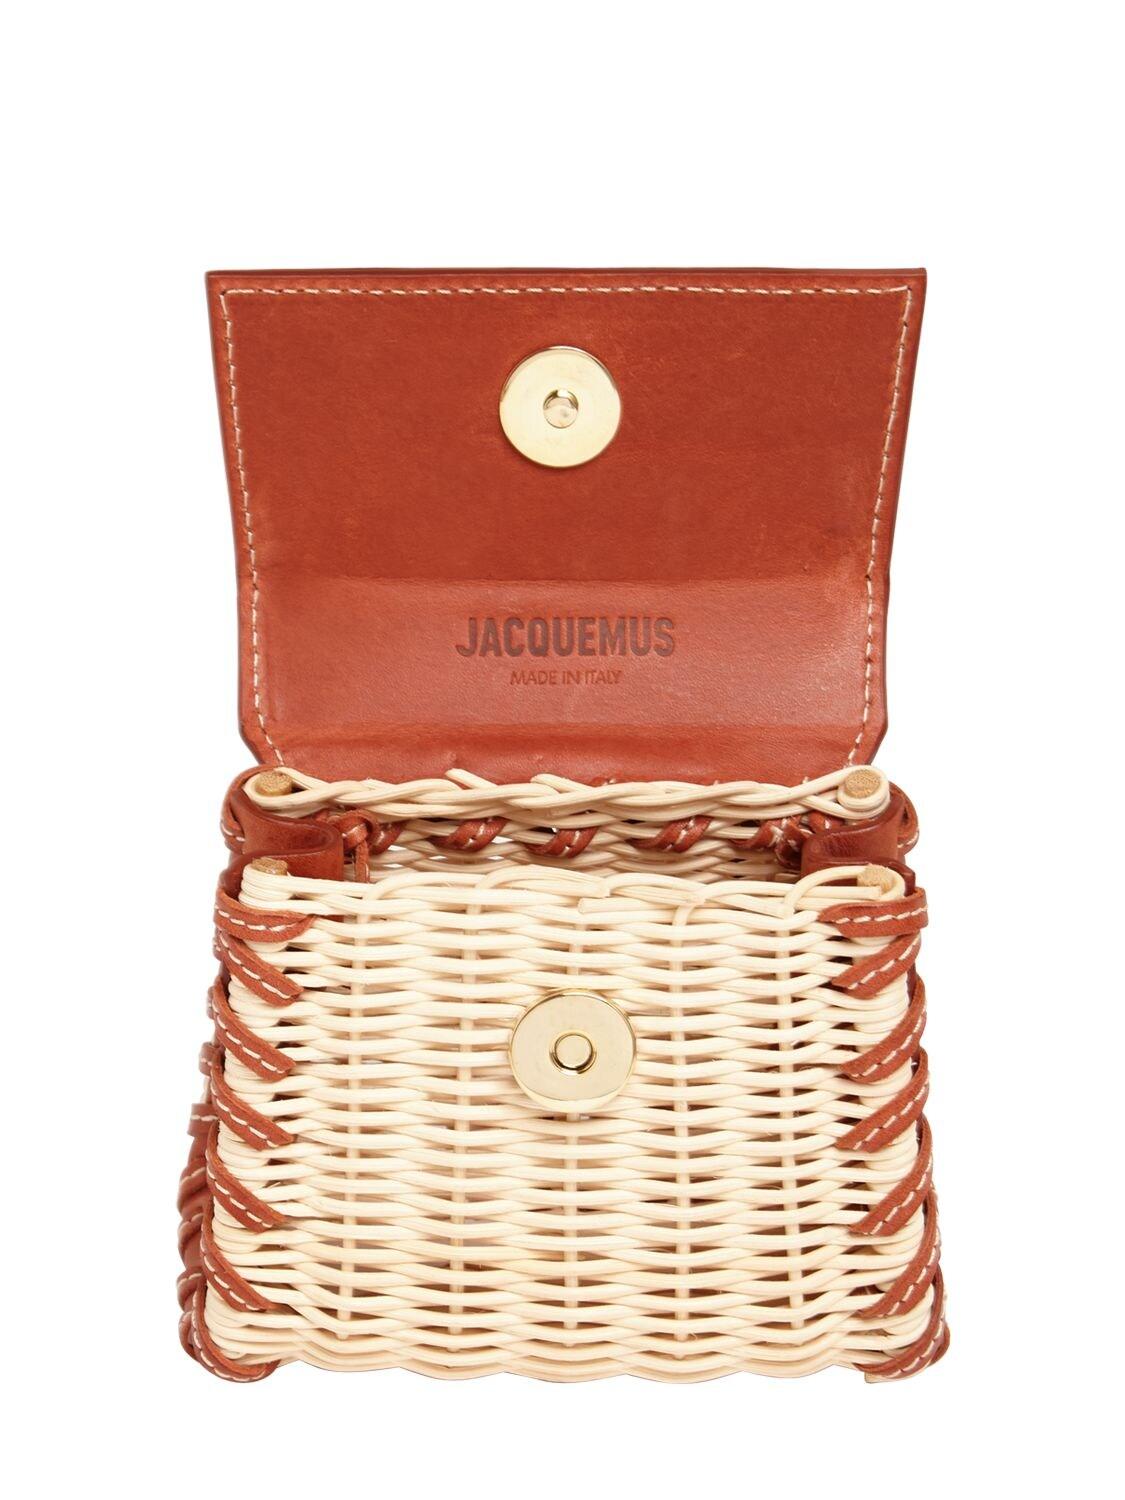 Jacquemus Leather and Rattan Chiquito Mini-Bag in Brown